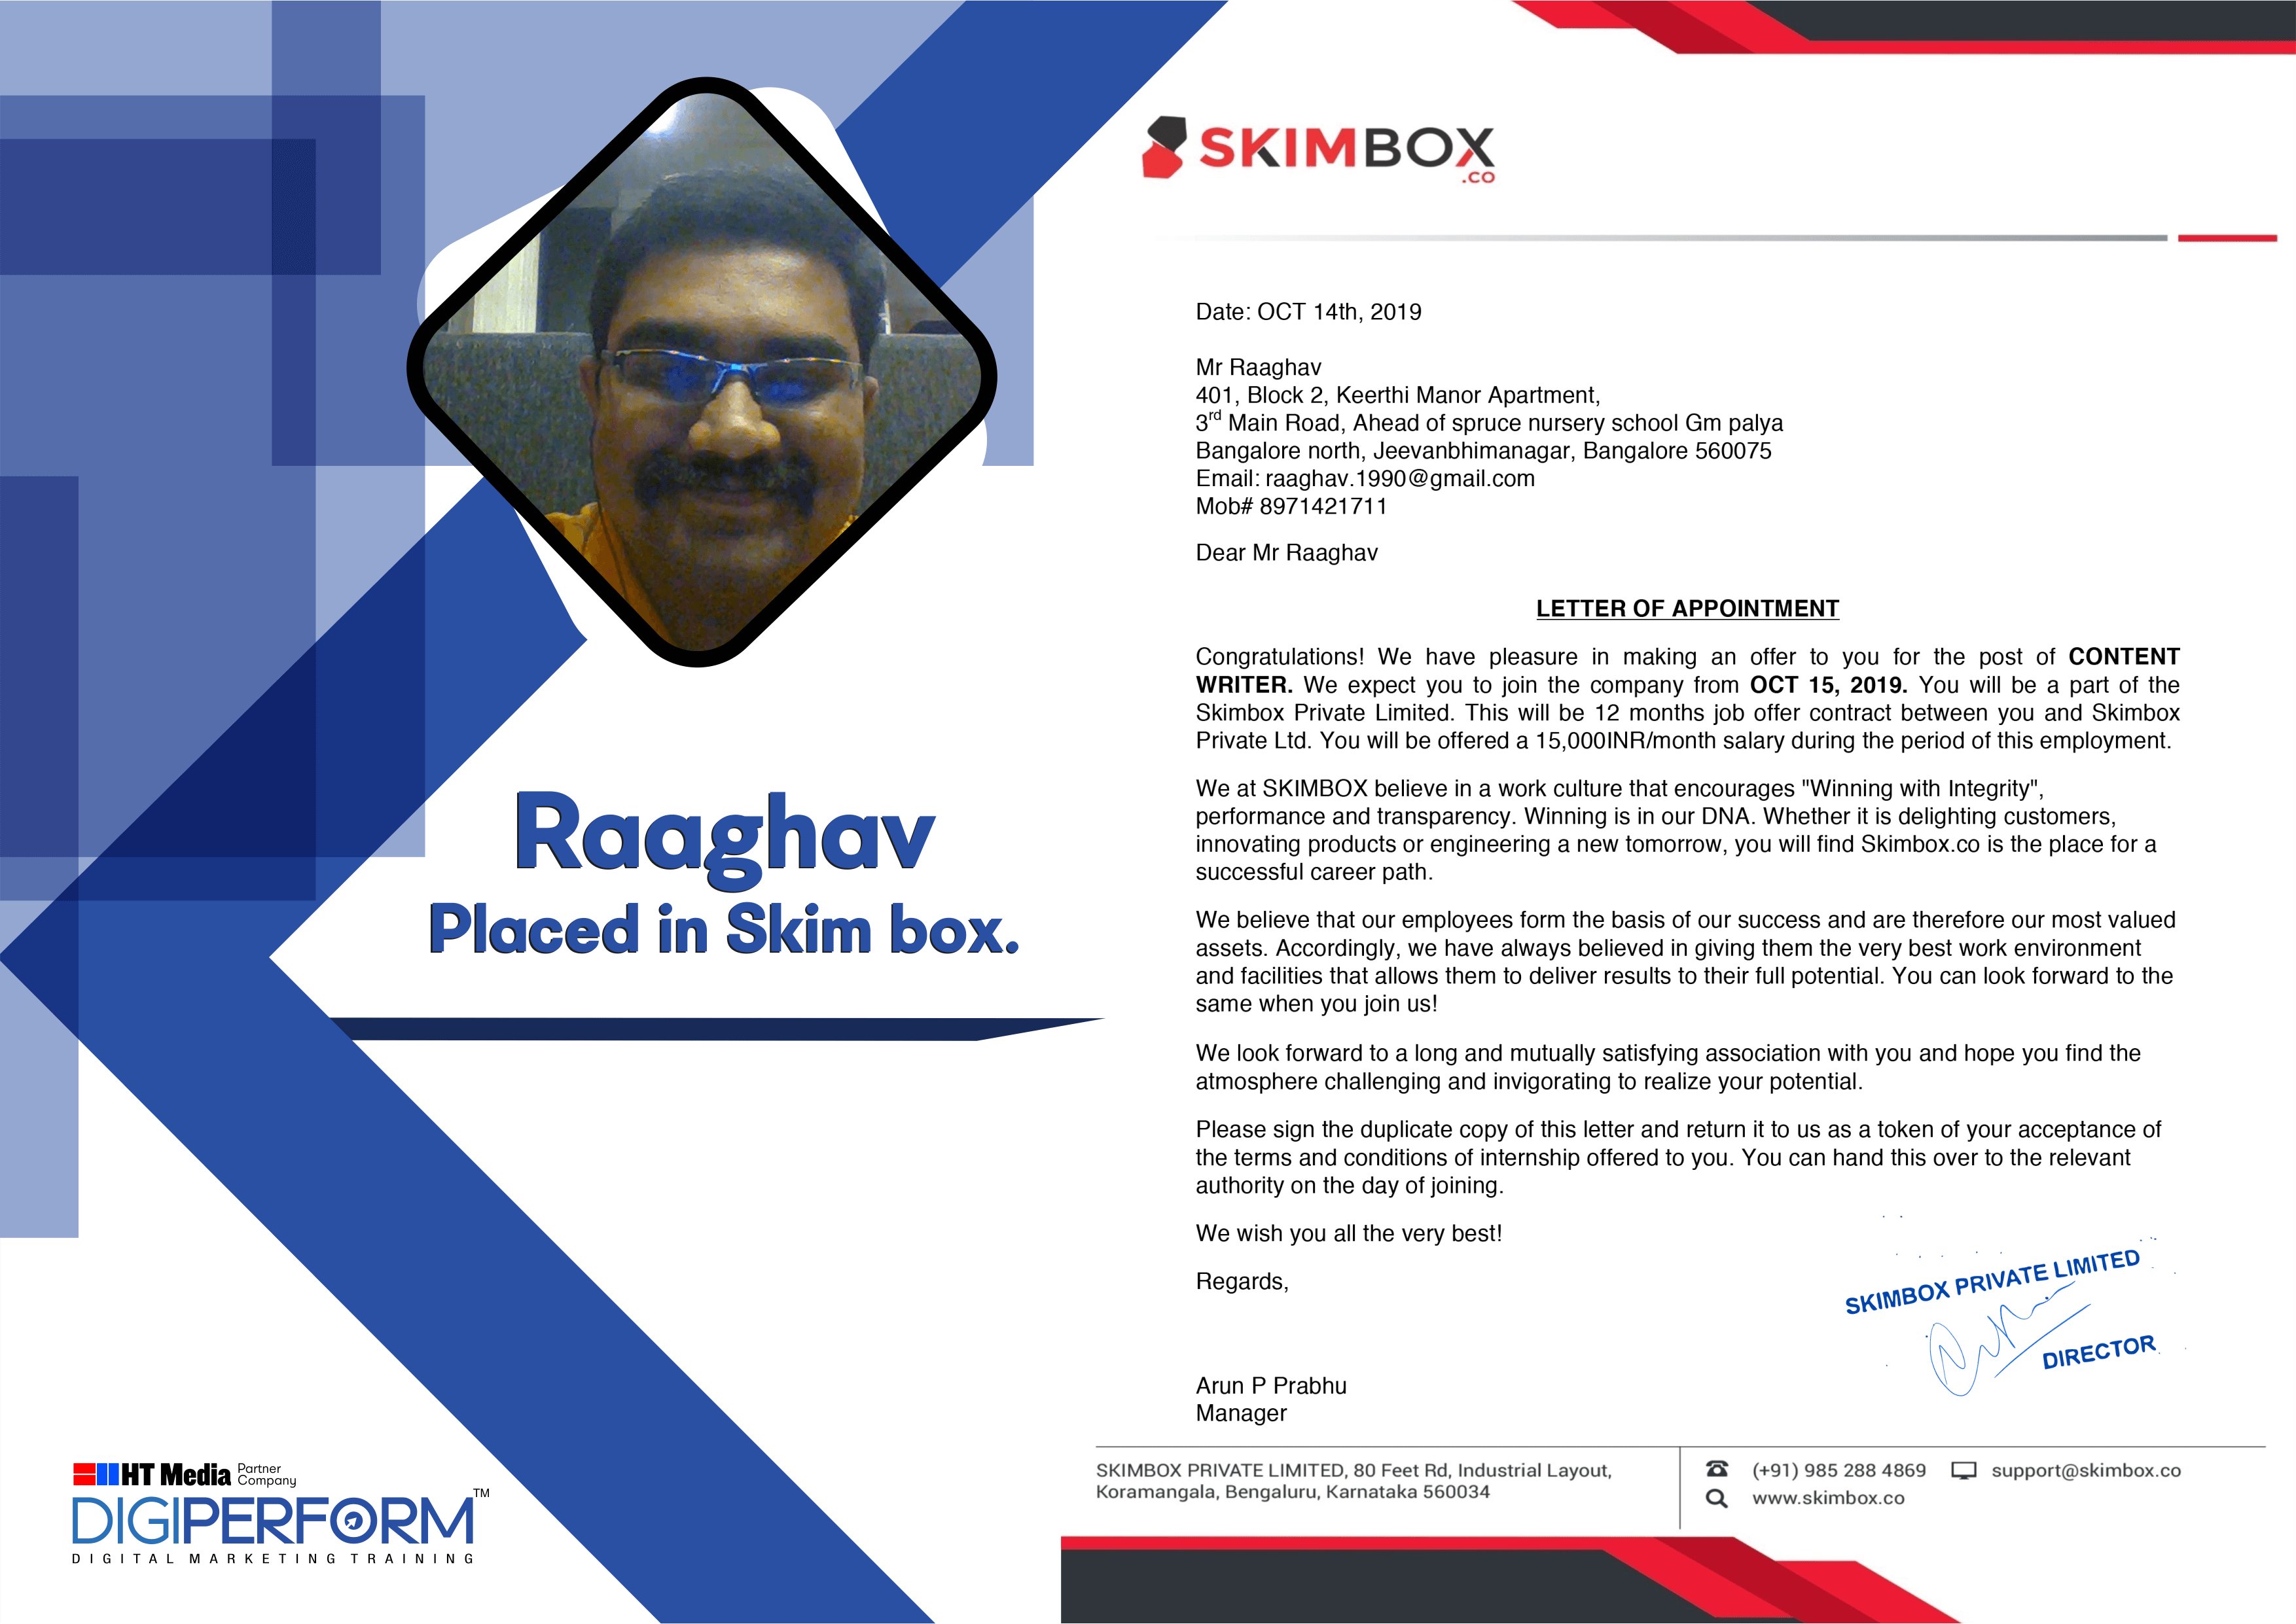 Digiperform Students - Raaghav placed in Skin box